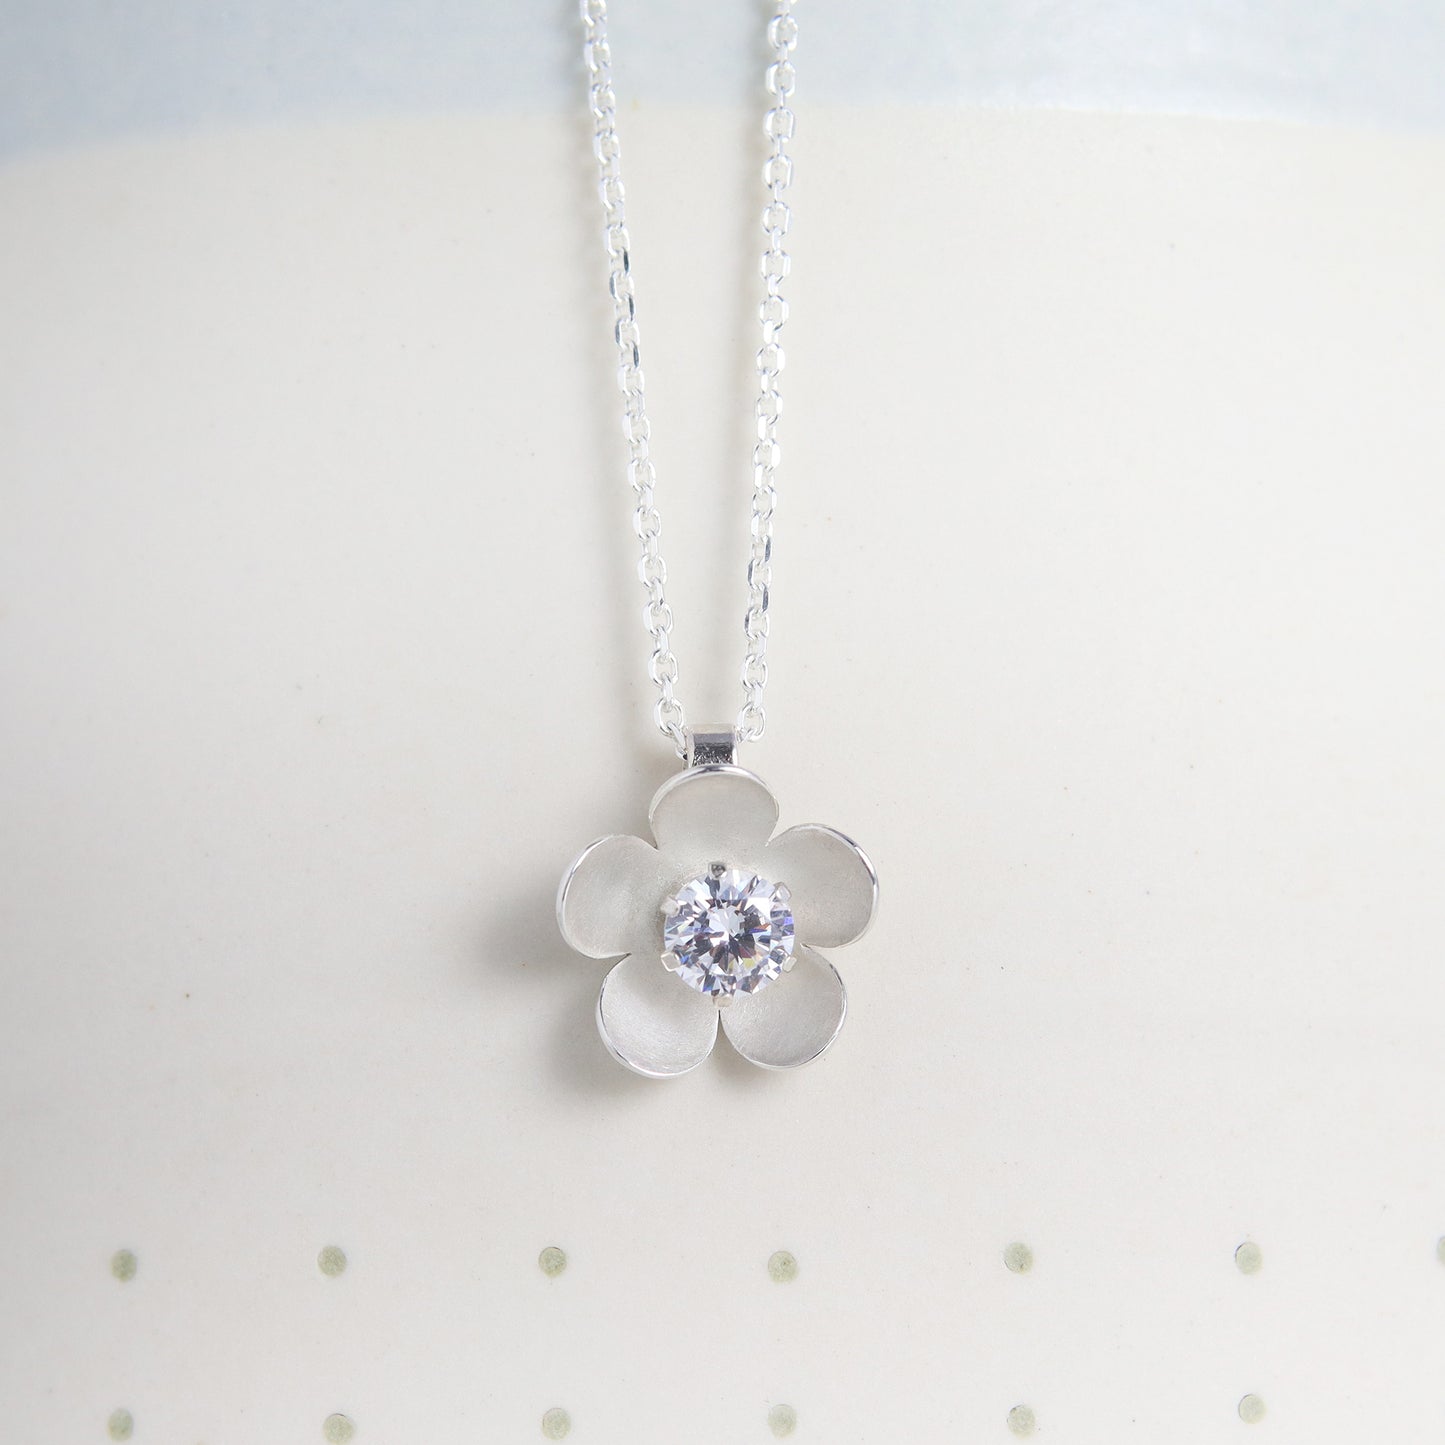 Silver blossom flower necklace with choice of birthstone